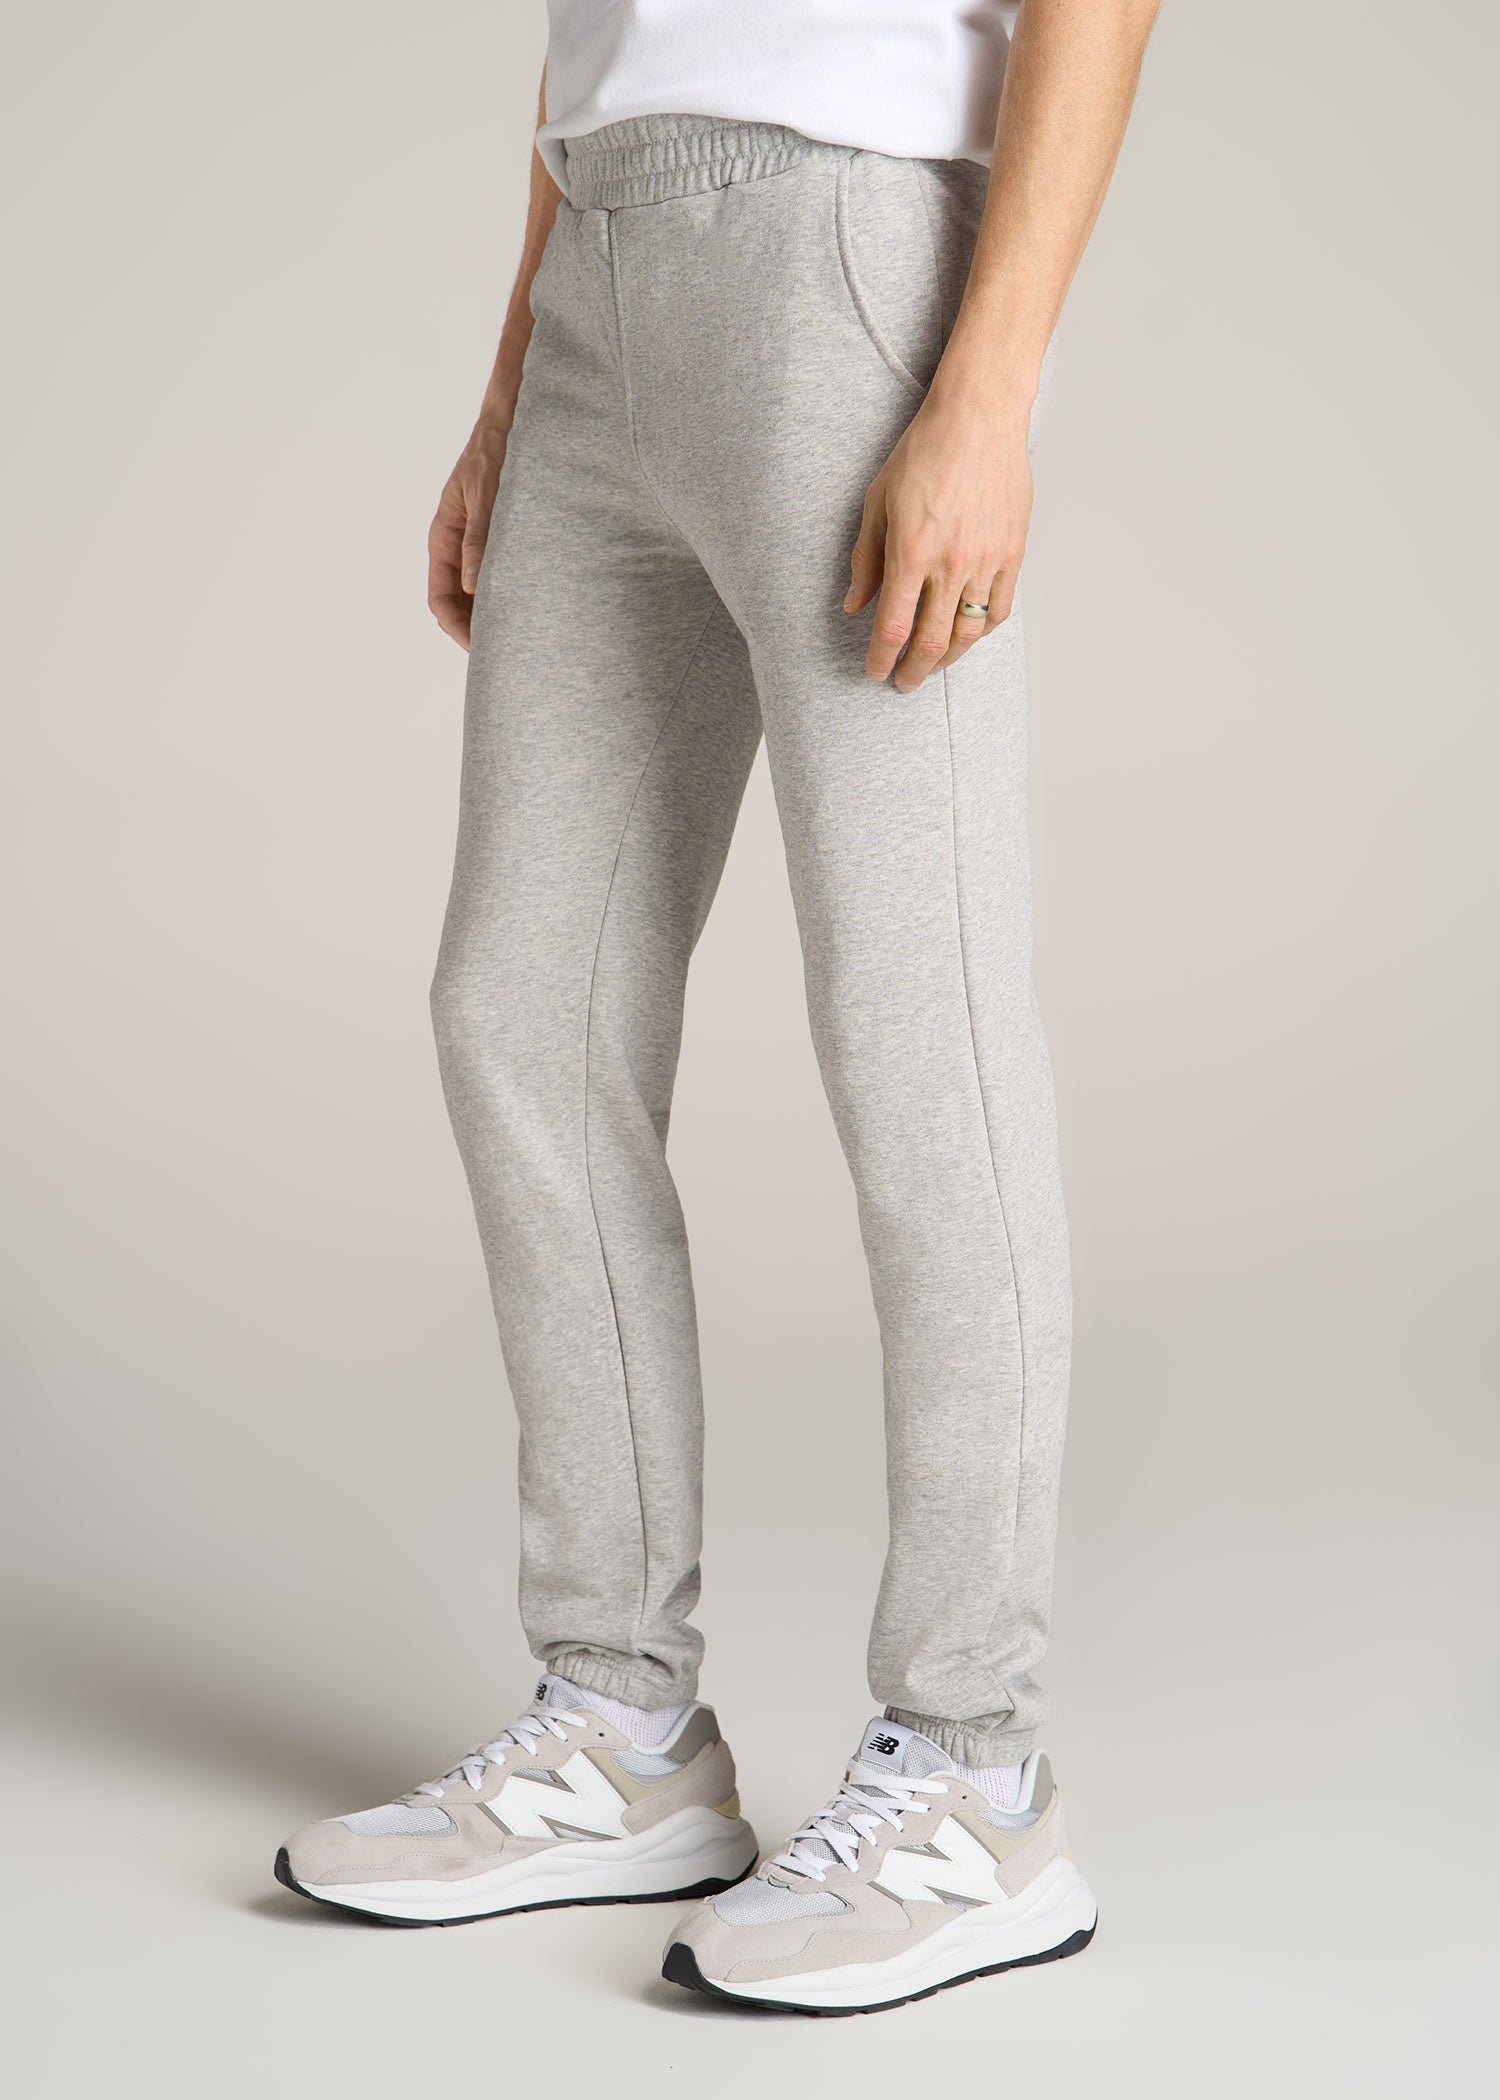 Men's Tall French Terry Sweatpants Charcoal Mix